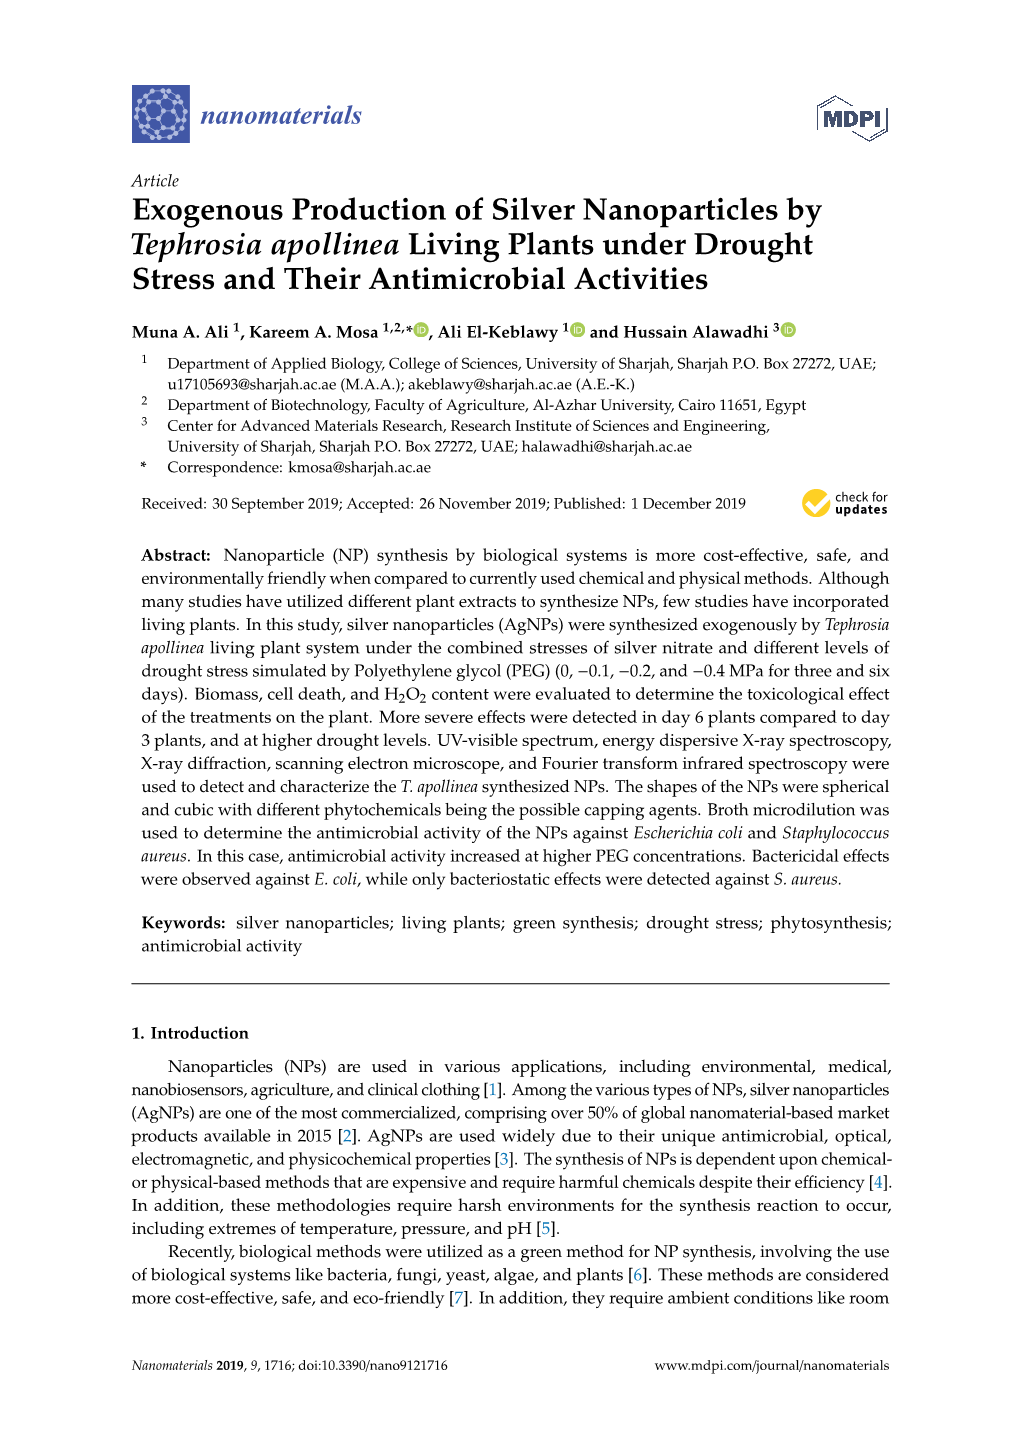 Exogenous Production of Silver Nanoparticles by Tephrosia Apollinea Living Plants Under Drought Stress and Their Antimicrobial Activities